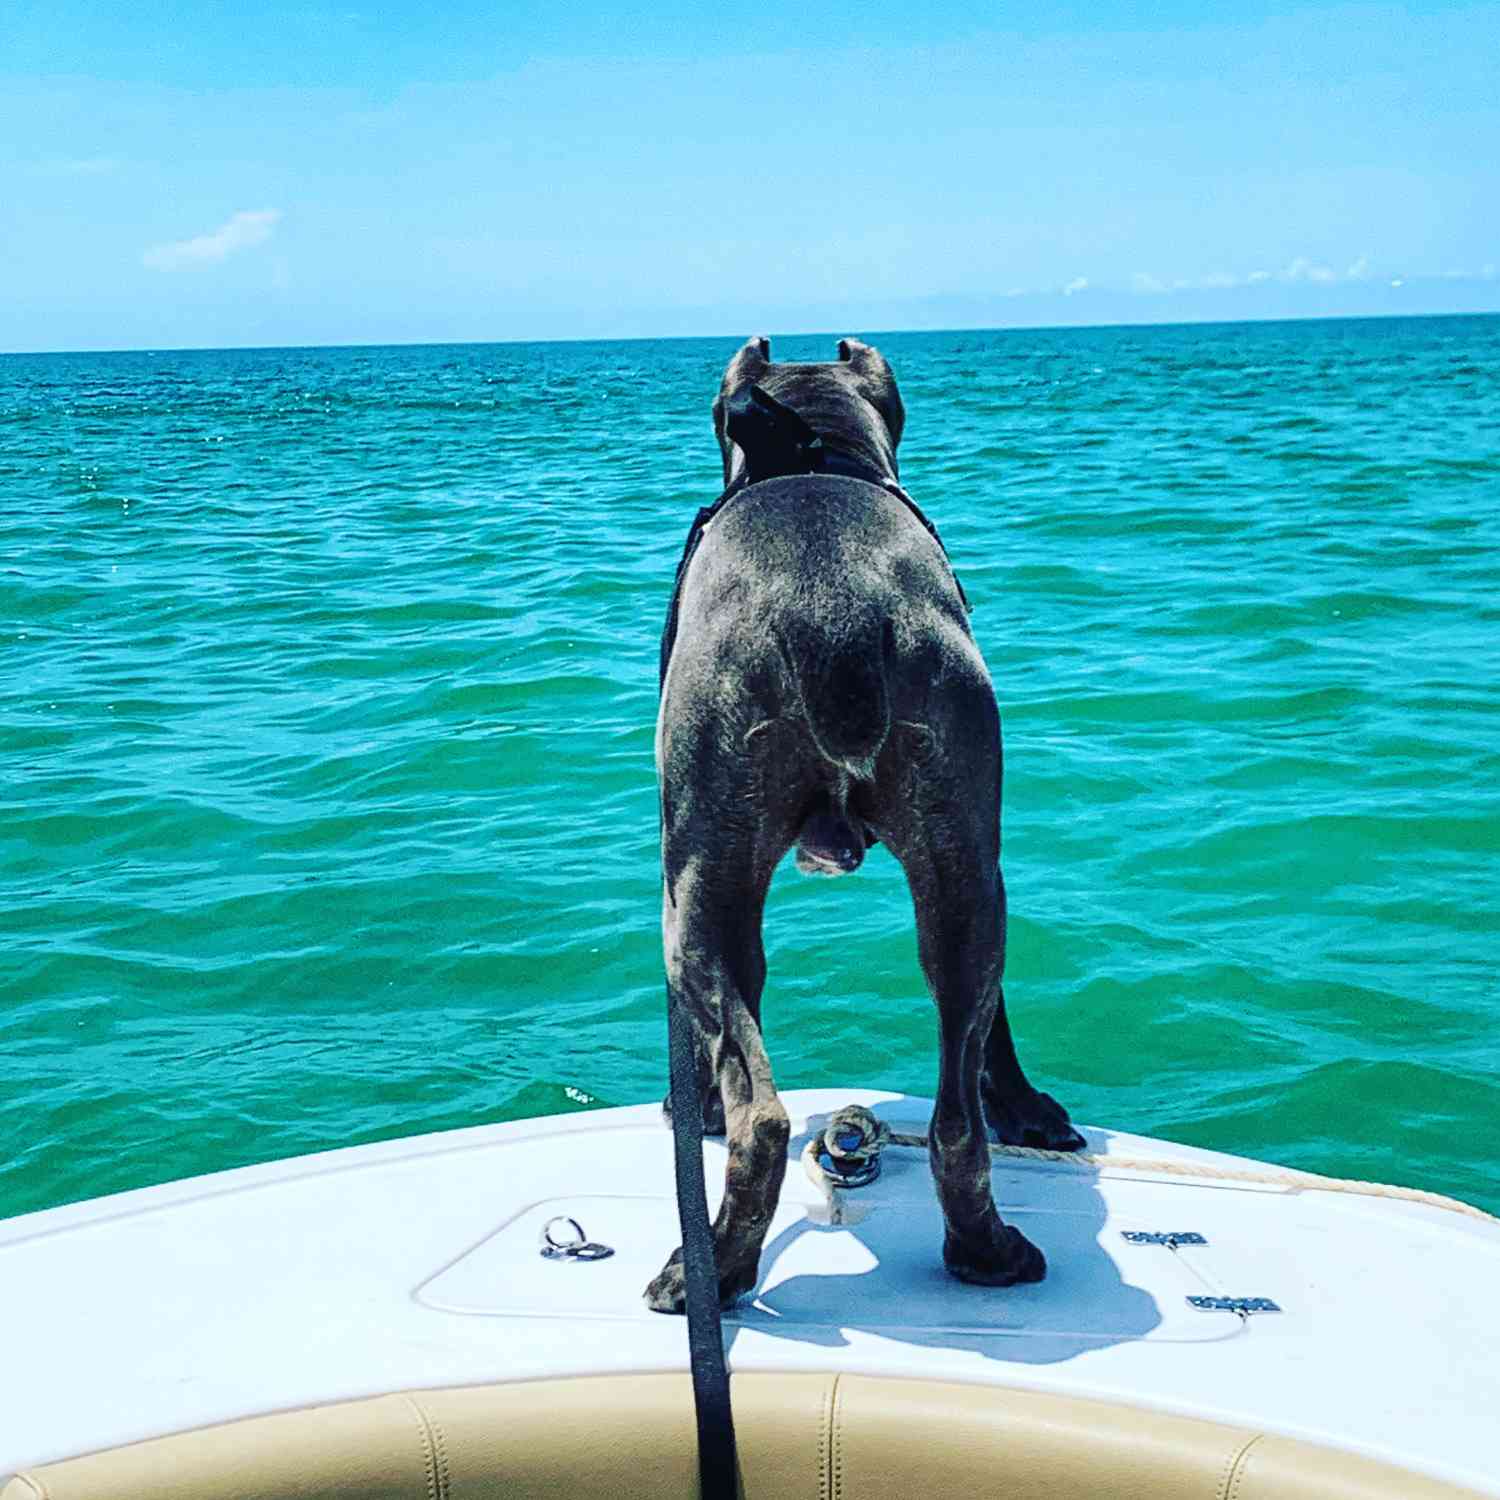 Title: Best Hood Ornament Ever ? - On board their Sportsman Heritage 211 Center Console - Location: Siesta key Florida. Participating in the Photo Contest #SportsmanAugust2020